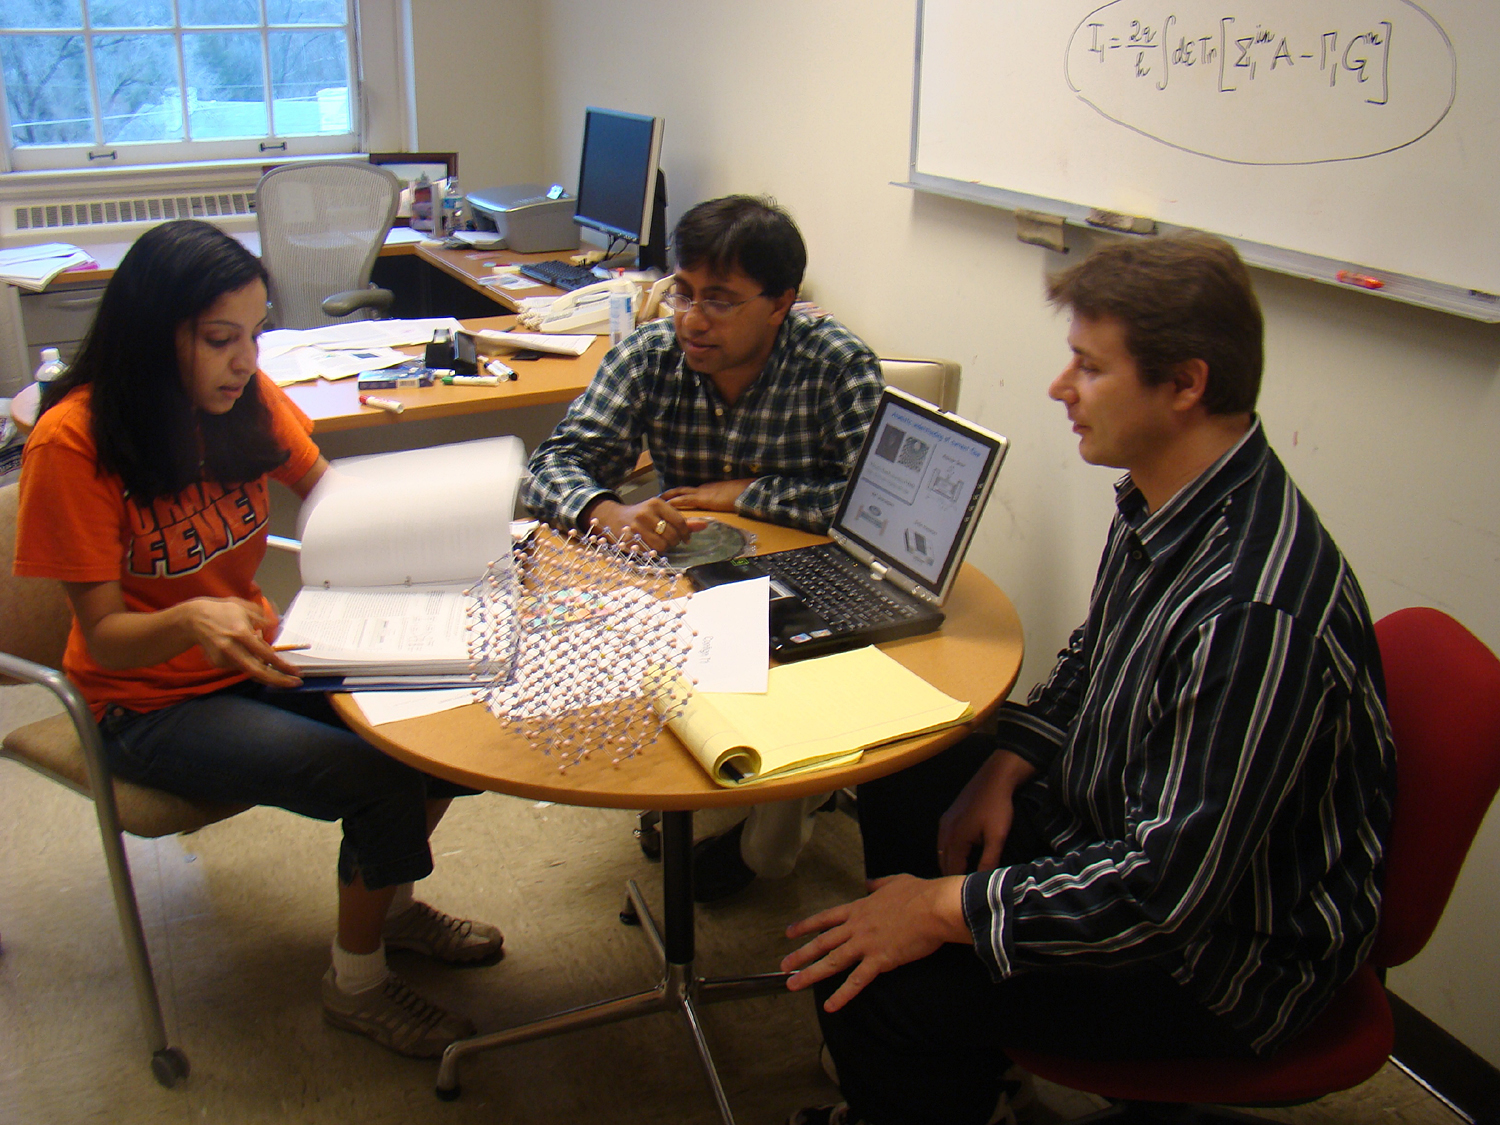 Smitha Vasudevan, Ghosh, and Dr Kamil Walczak all sit at a table working together